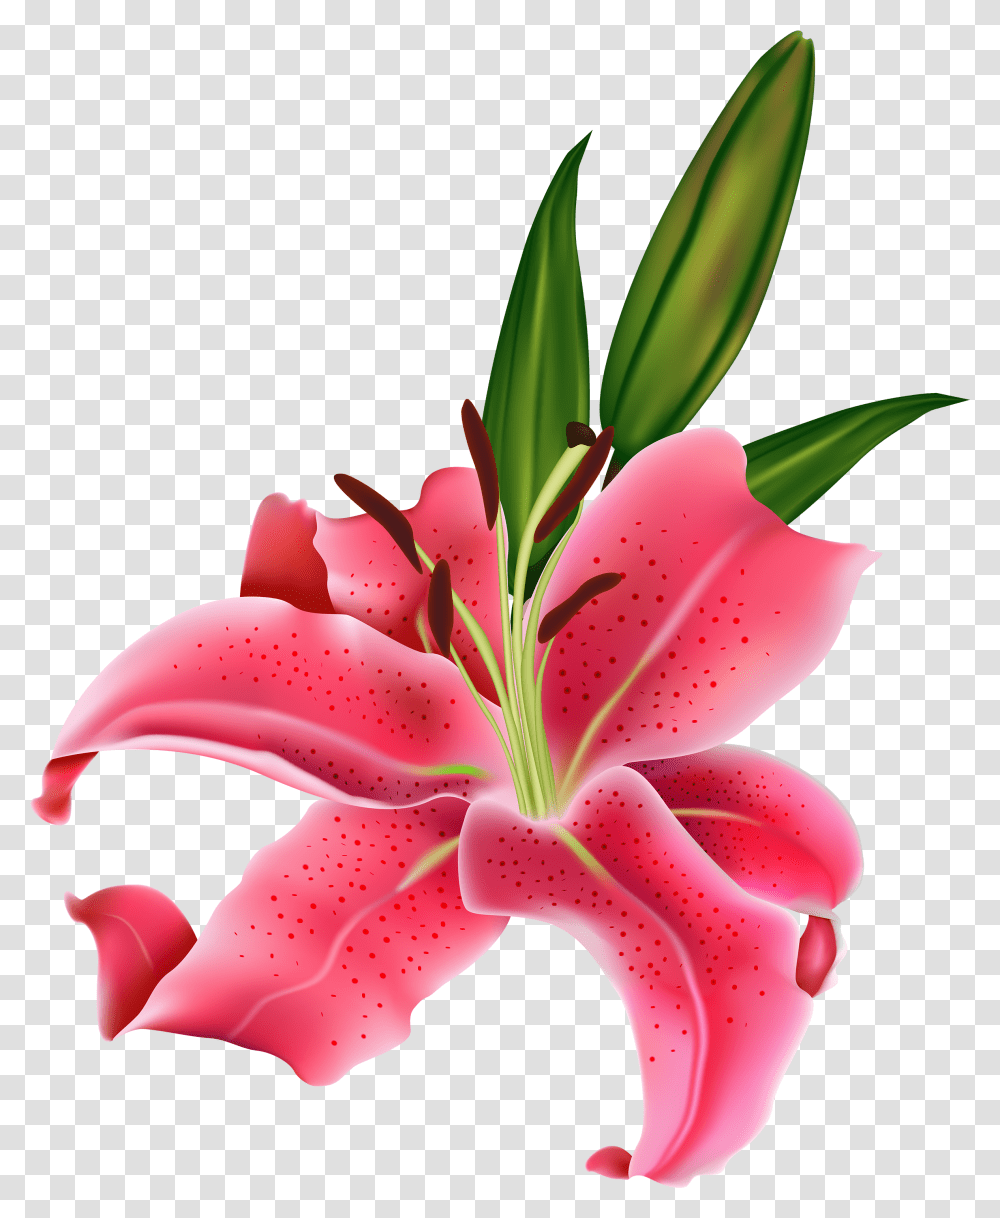 Pink Flower Lily Calla Lily Lilies Flower, Plant, Blossom, Petal, Amaryllis Transparent Png